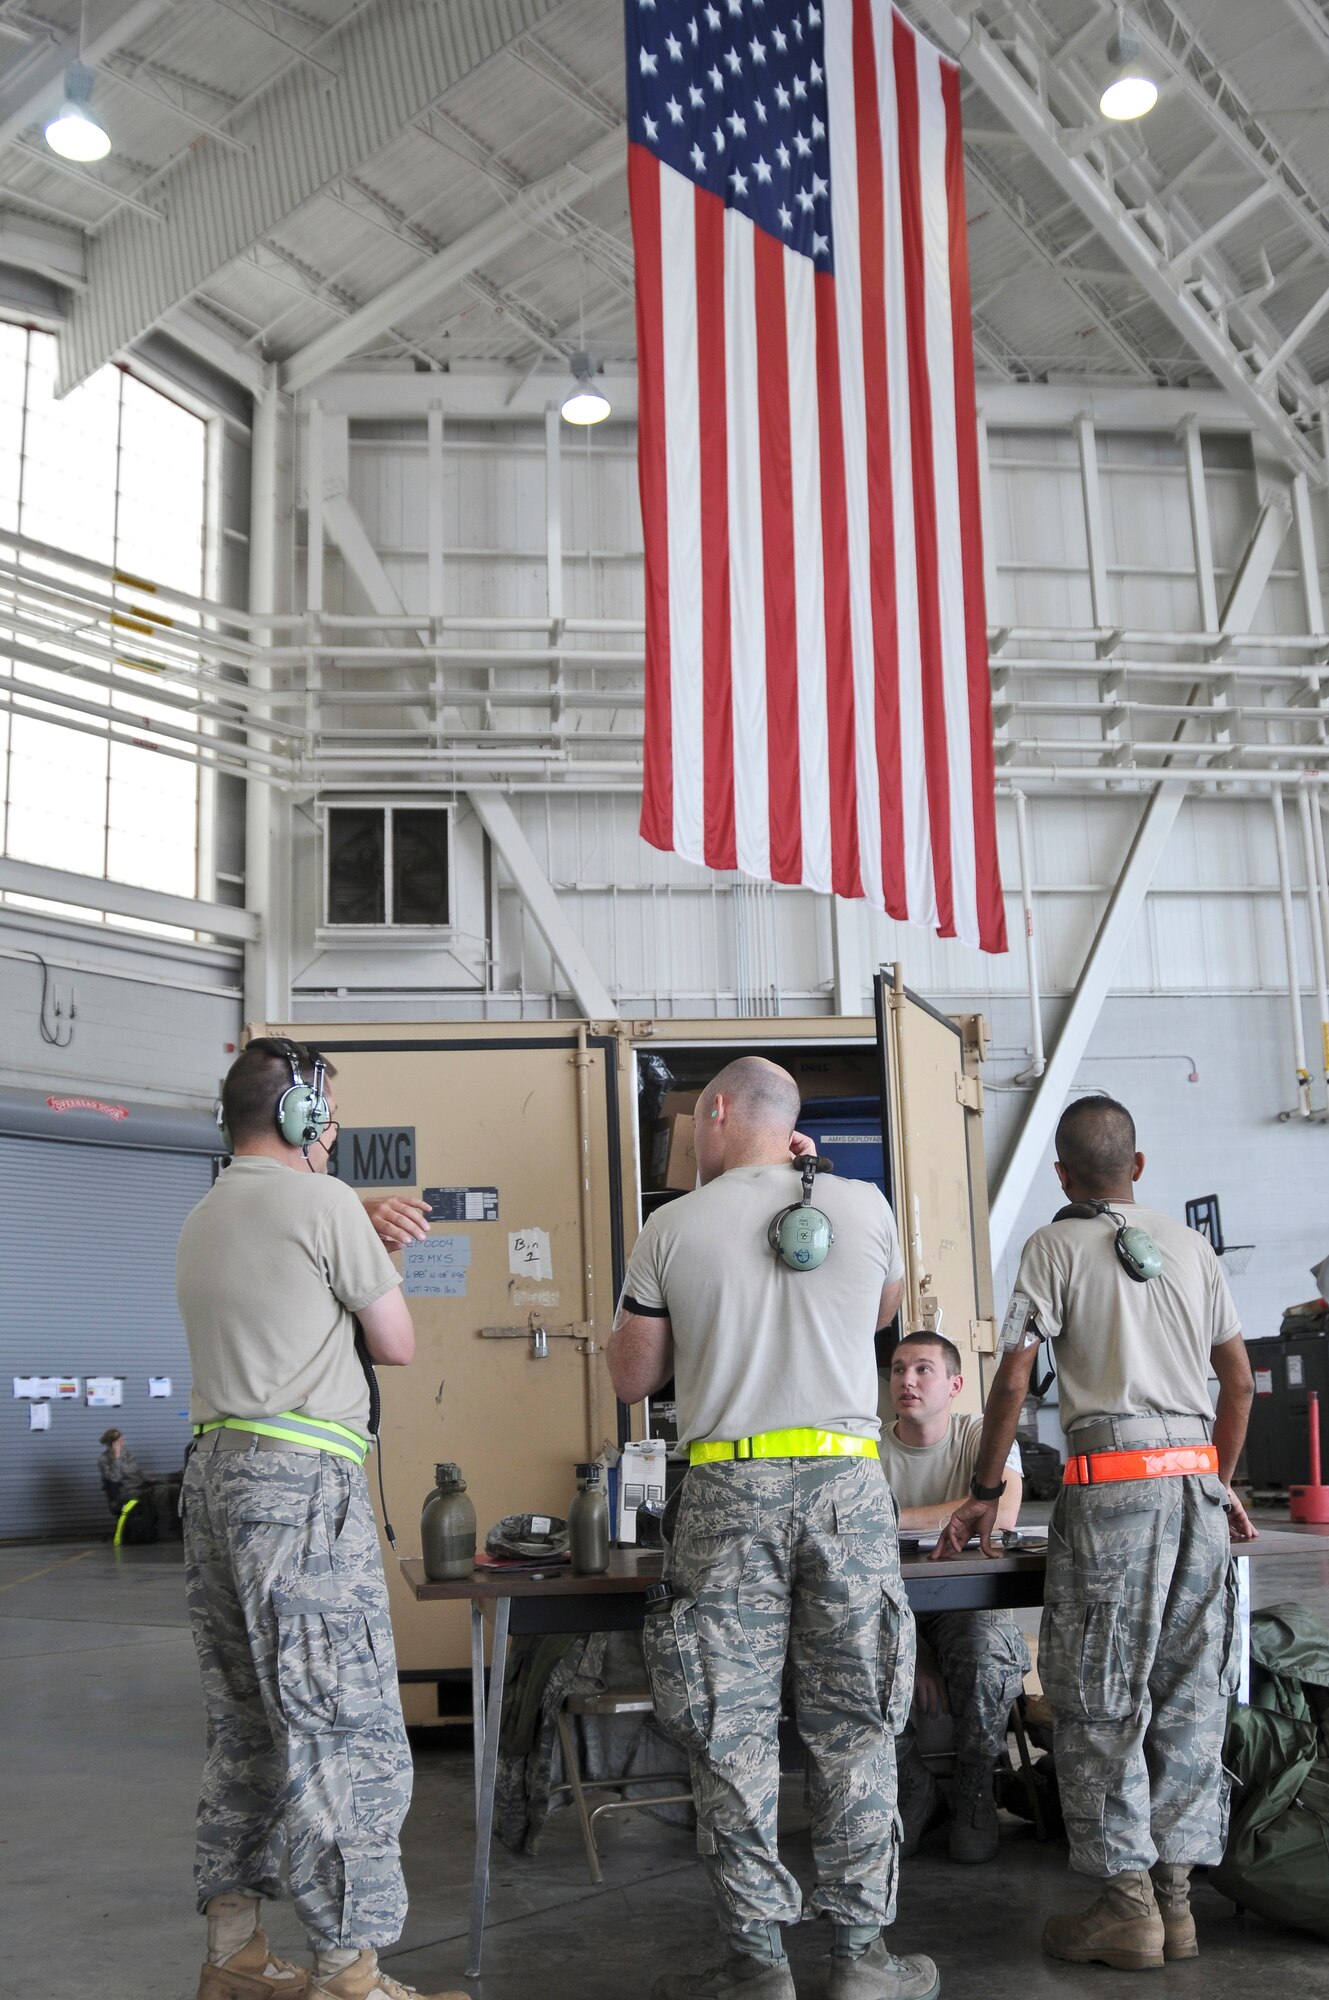 Air cargo specialists from the notional 104th Air Expeditionary Wing discuss their upcoming duties May 19, 2010 while standing in front of a large American Flag inside the Main Hanger at the Gulfport Combat Readiness Training Center in Gulfport, Miss. Airmen from the Kentucky Air National Guard's 123rd Airlift Wing, the active-duty Air Force's 317th Airlift Group at Dyess Air Force Base, Texas, and the Air Force Reserve's 70th Aerial Port Squadron from Homestead Air Reserve Base, Fla., all combined to form the 104th during an Air Mobility Command Operational Readiness Inspection here. (U.S. Air Force photo/Tech. Sgt. Dennis Flora) (Released)